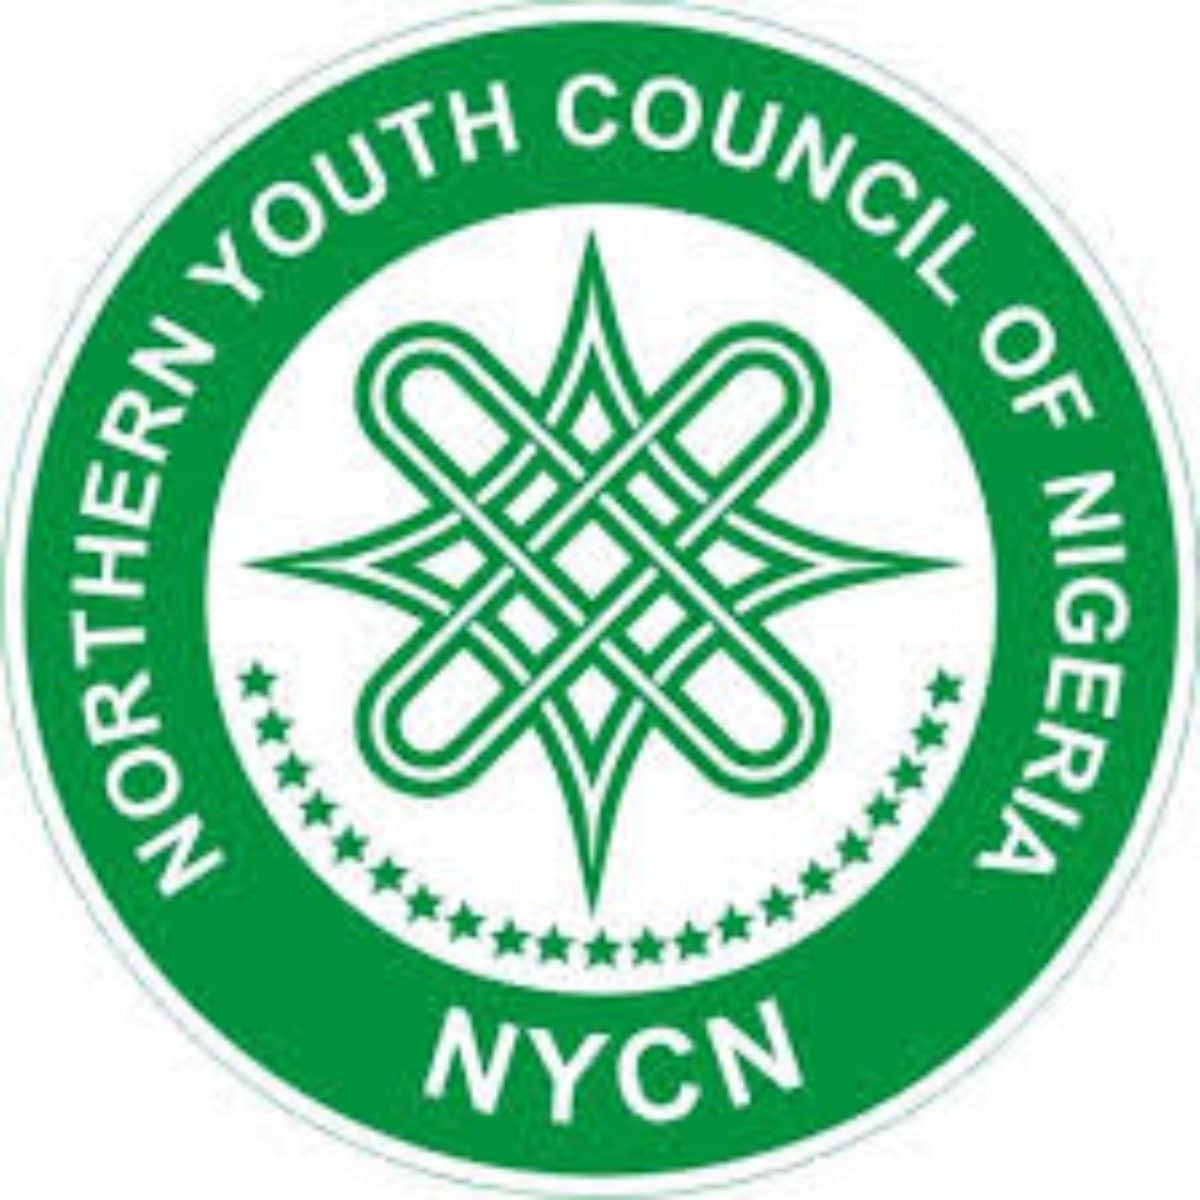 National Youth Day: Protests on bad state of roads in Niger has paid off - NYCN